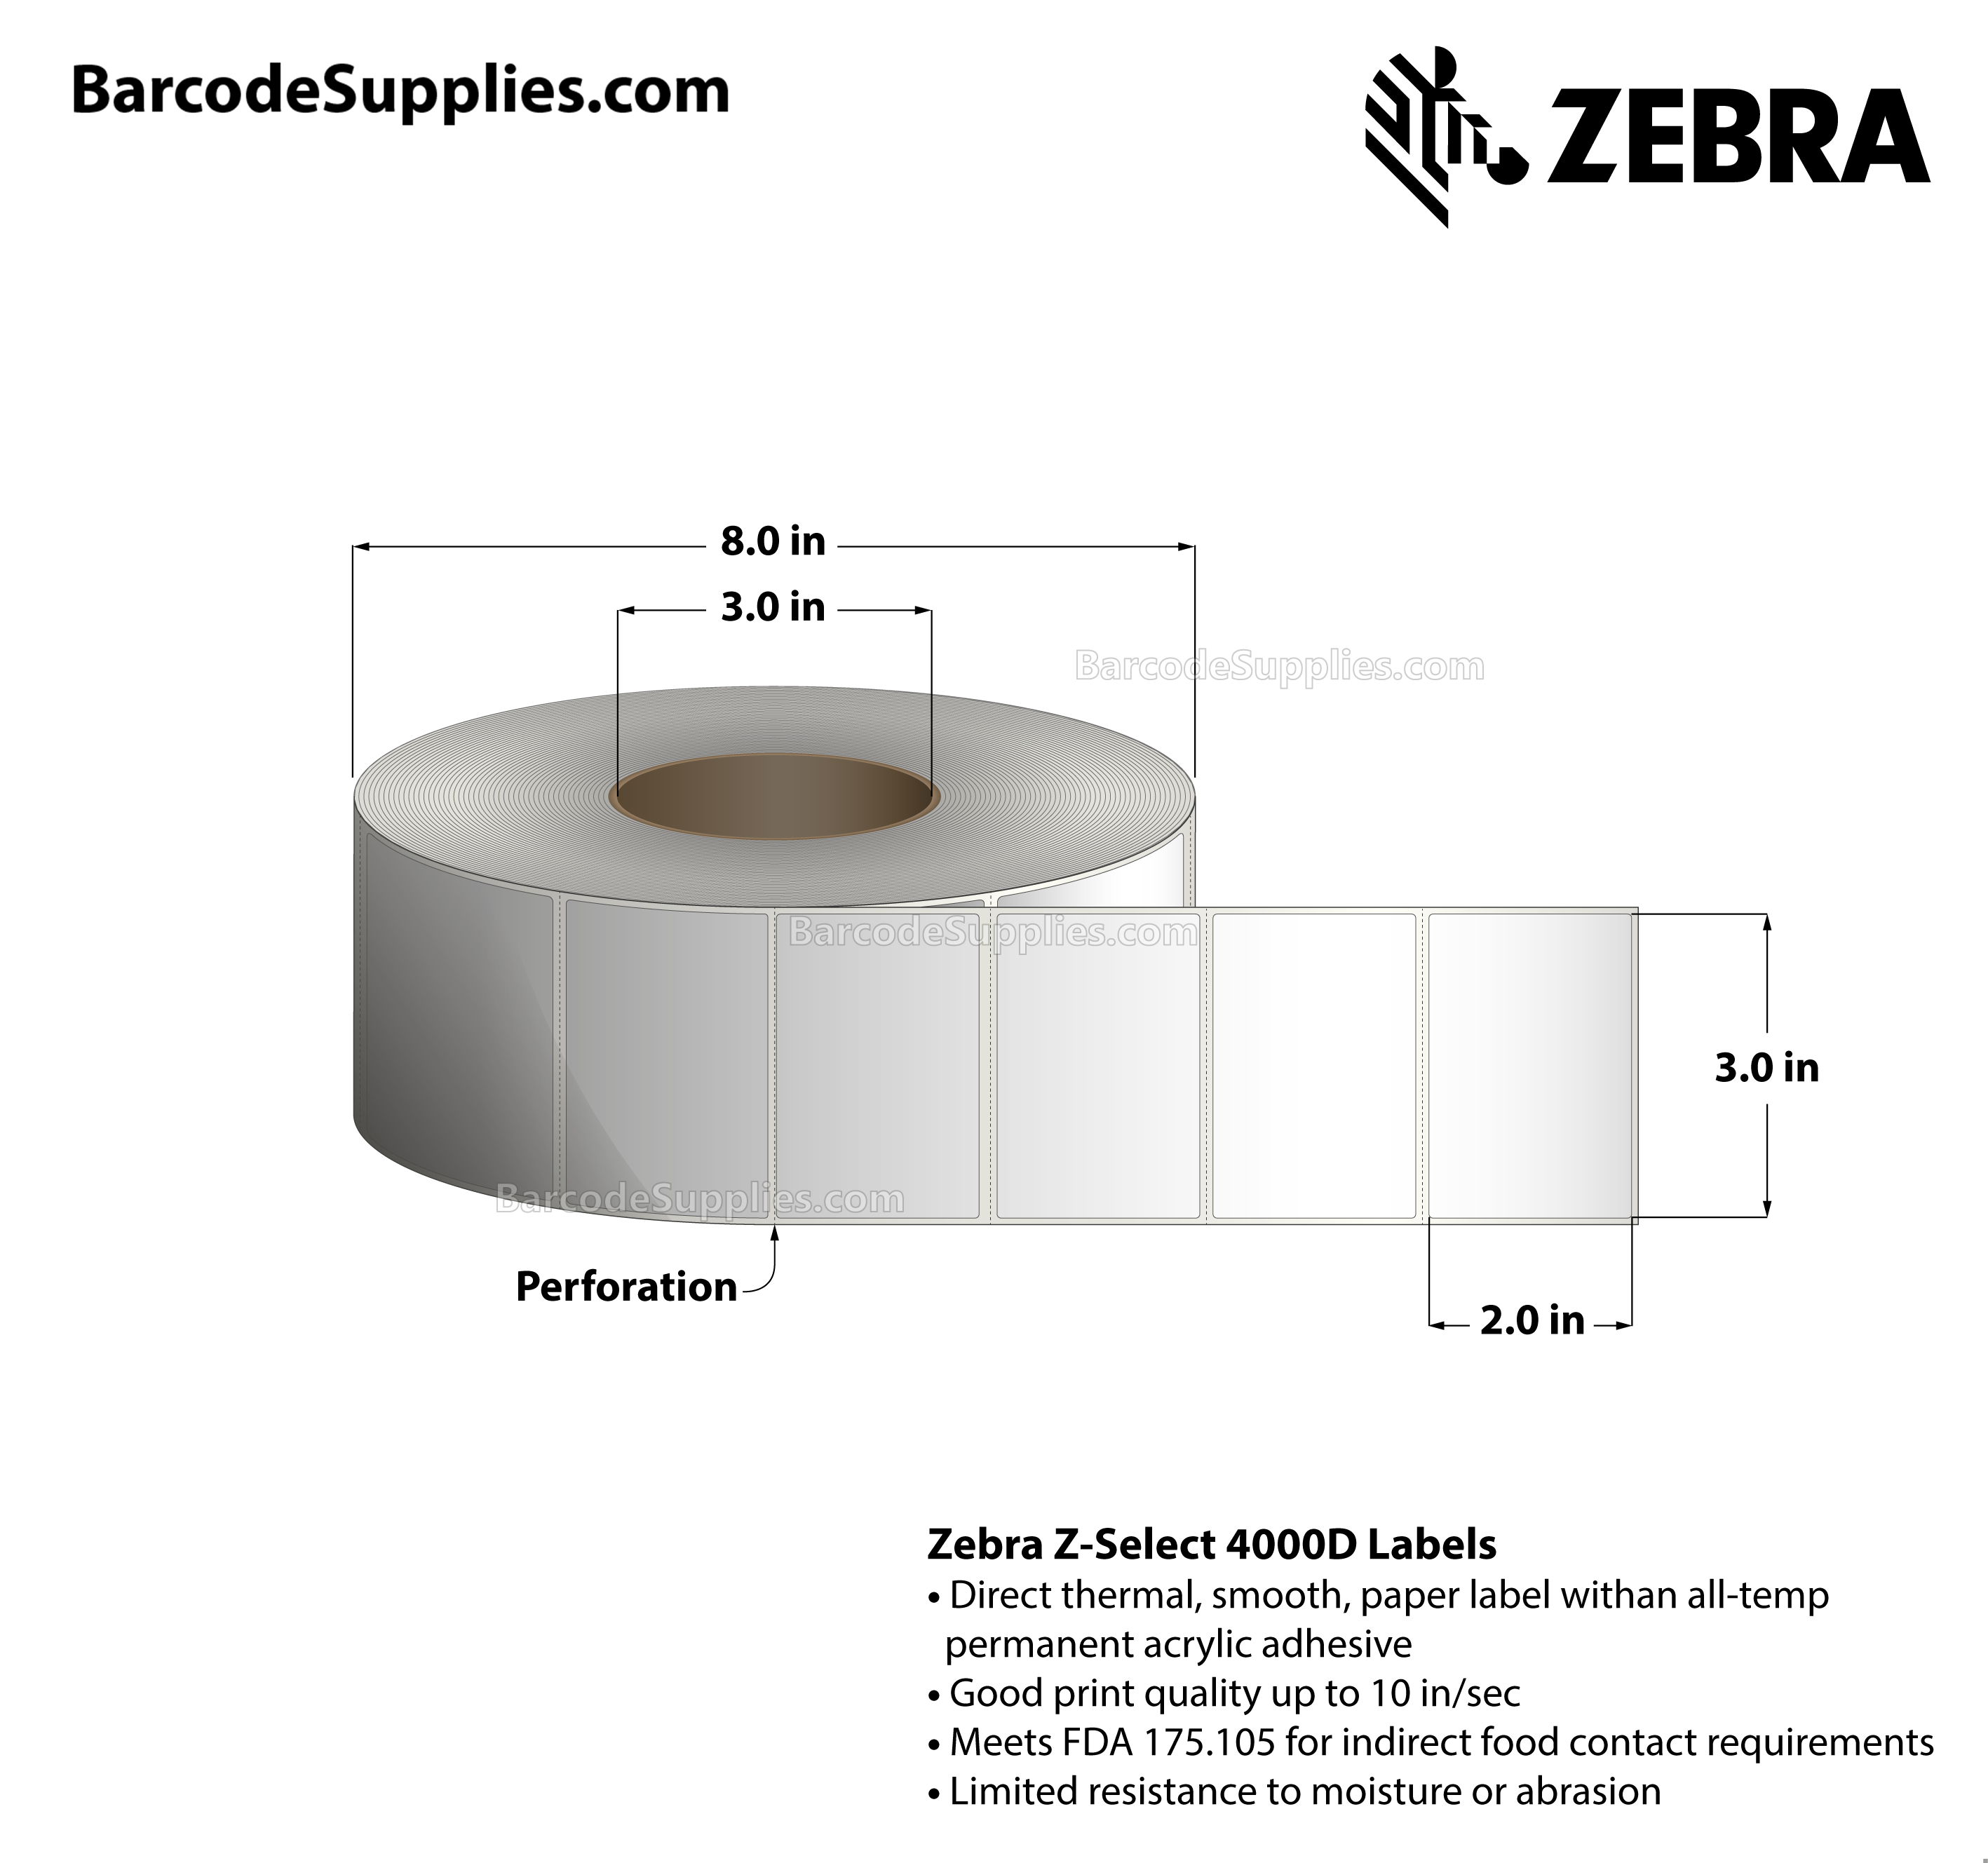 3 x 2 Direct Thermal White Z-Select 4000D Labels With All-Temp Adhesive - Perforated - 2710 Labels Per Roll - Carton Of 6 Rolls - 16260 Labels Total - MPN: 98958